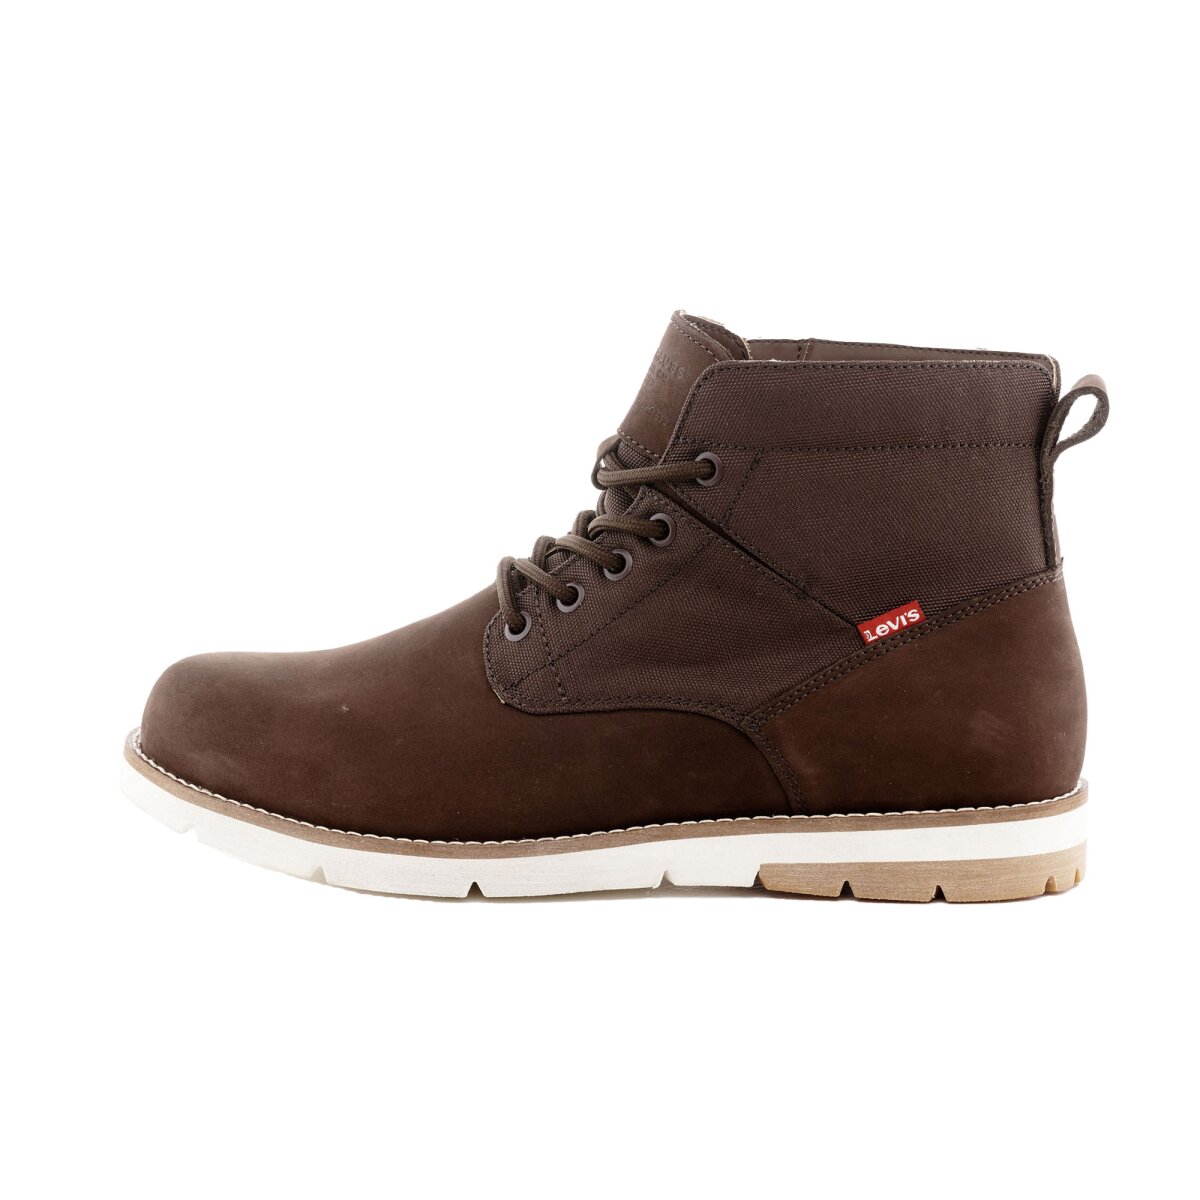 LEVI'S Men Boots - JAX, Ankle Boots, Boots, Leather, Logo, Lacing, so